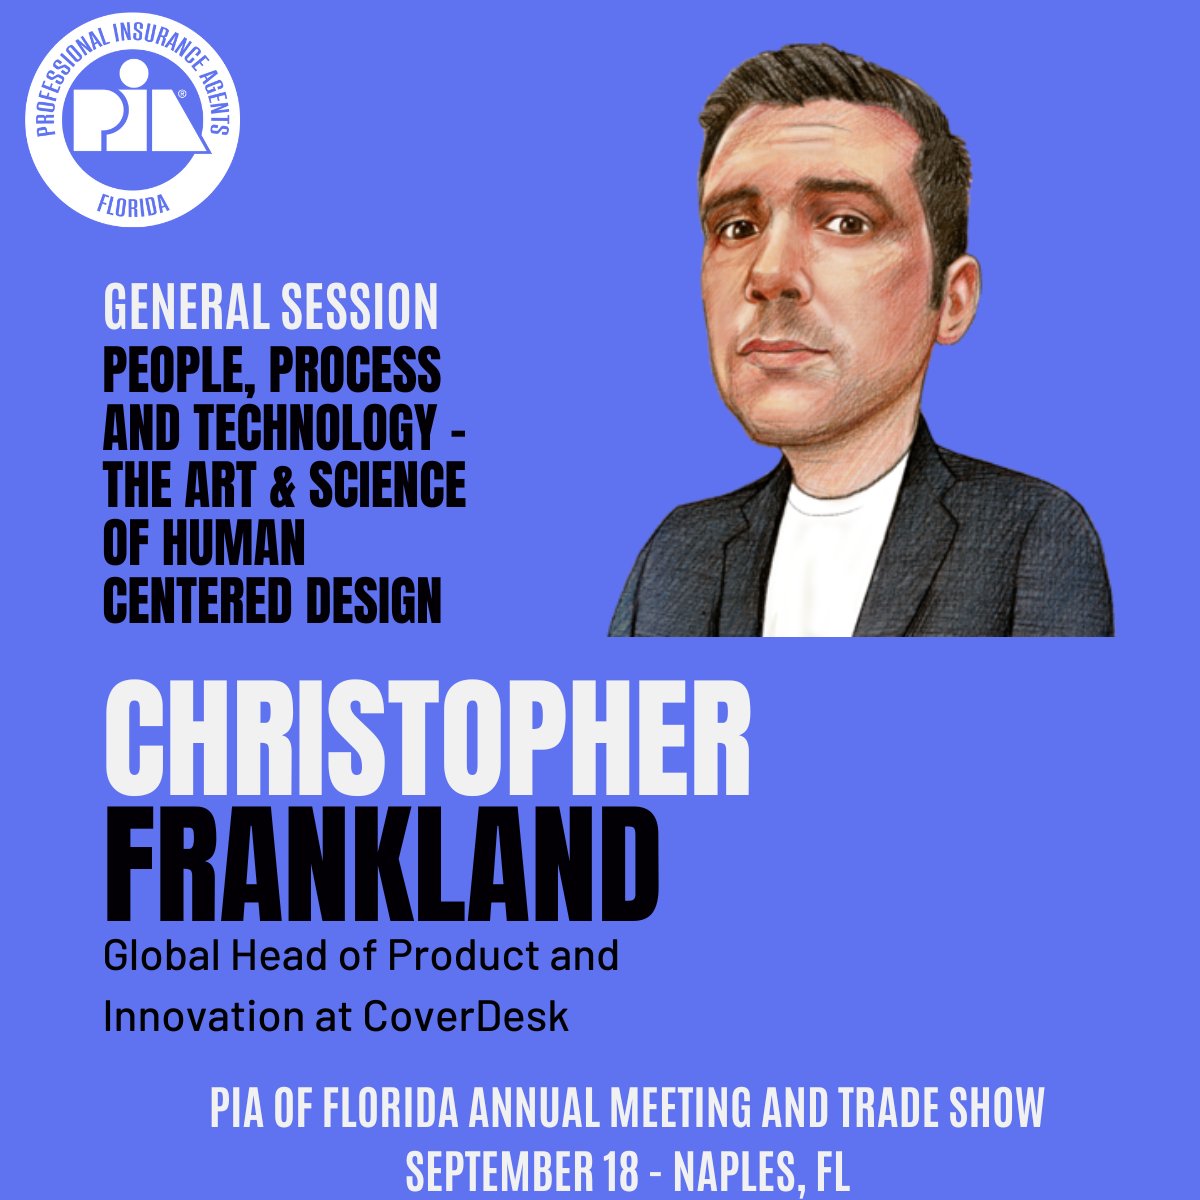 AI exciting or scary? @csfrankland gen. session at @piafl Ann Mtg & Trade Show to hear his thoughts on The Art & Science of #humancentereddesign & why ppl are as much a priority & necessity for the future of ins. as tech. Use SPECIAL23 to save more. lnkd.in/esXjkThF